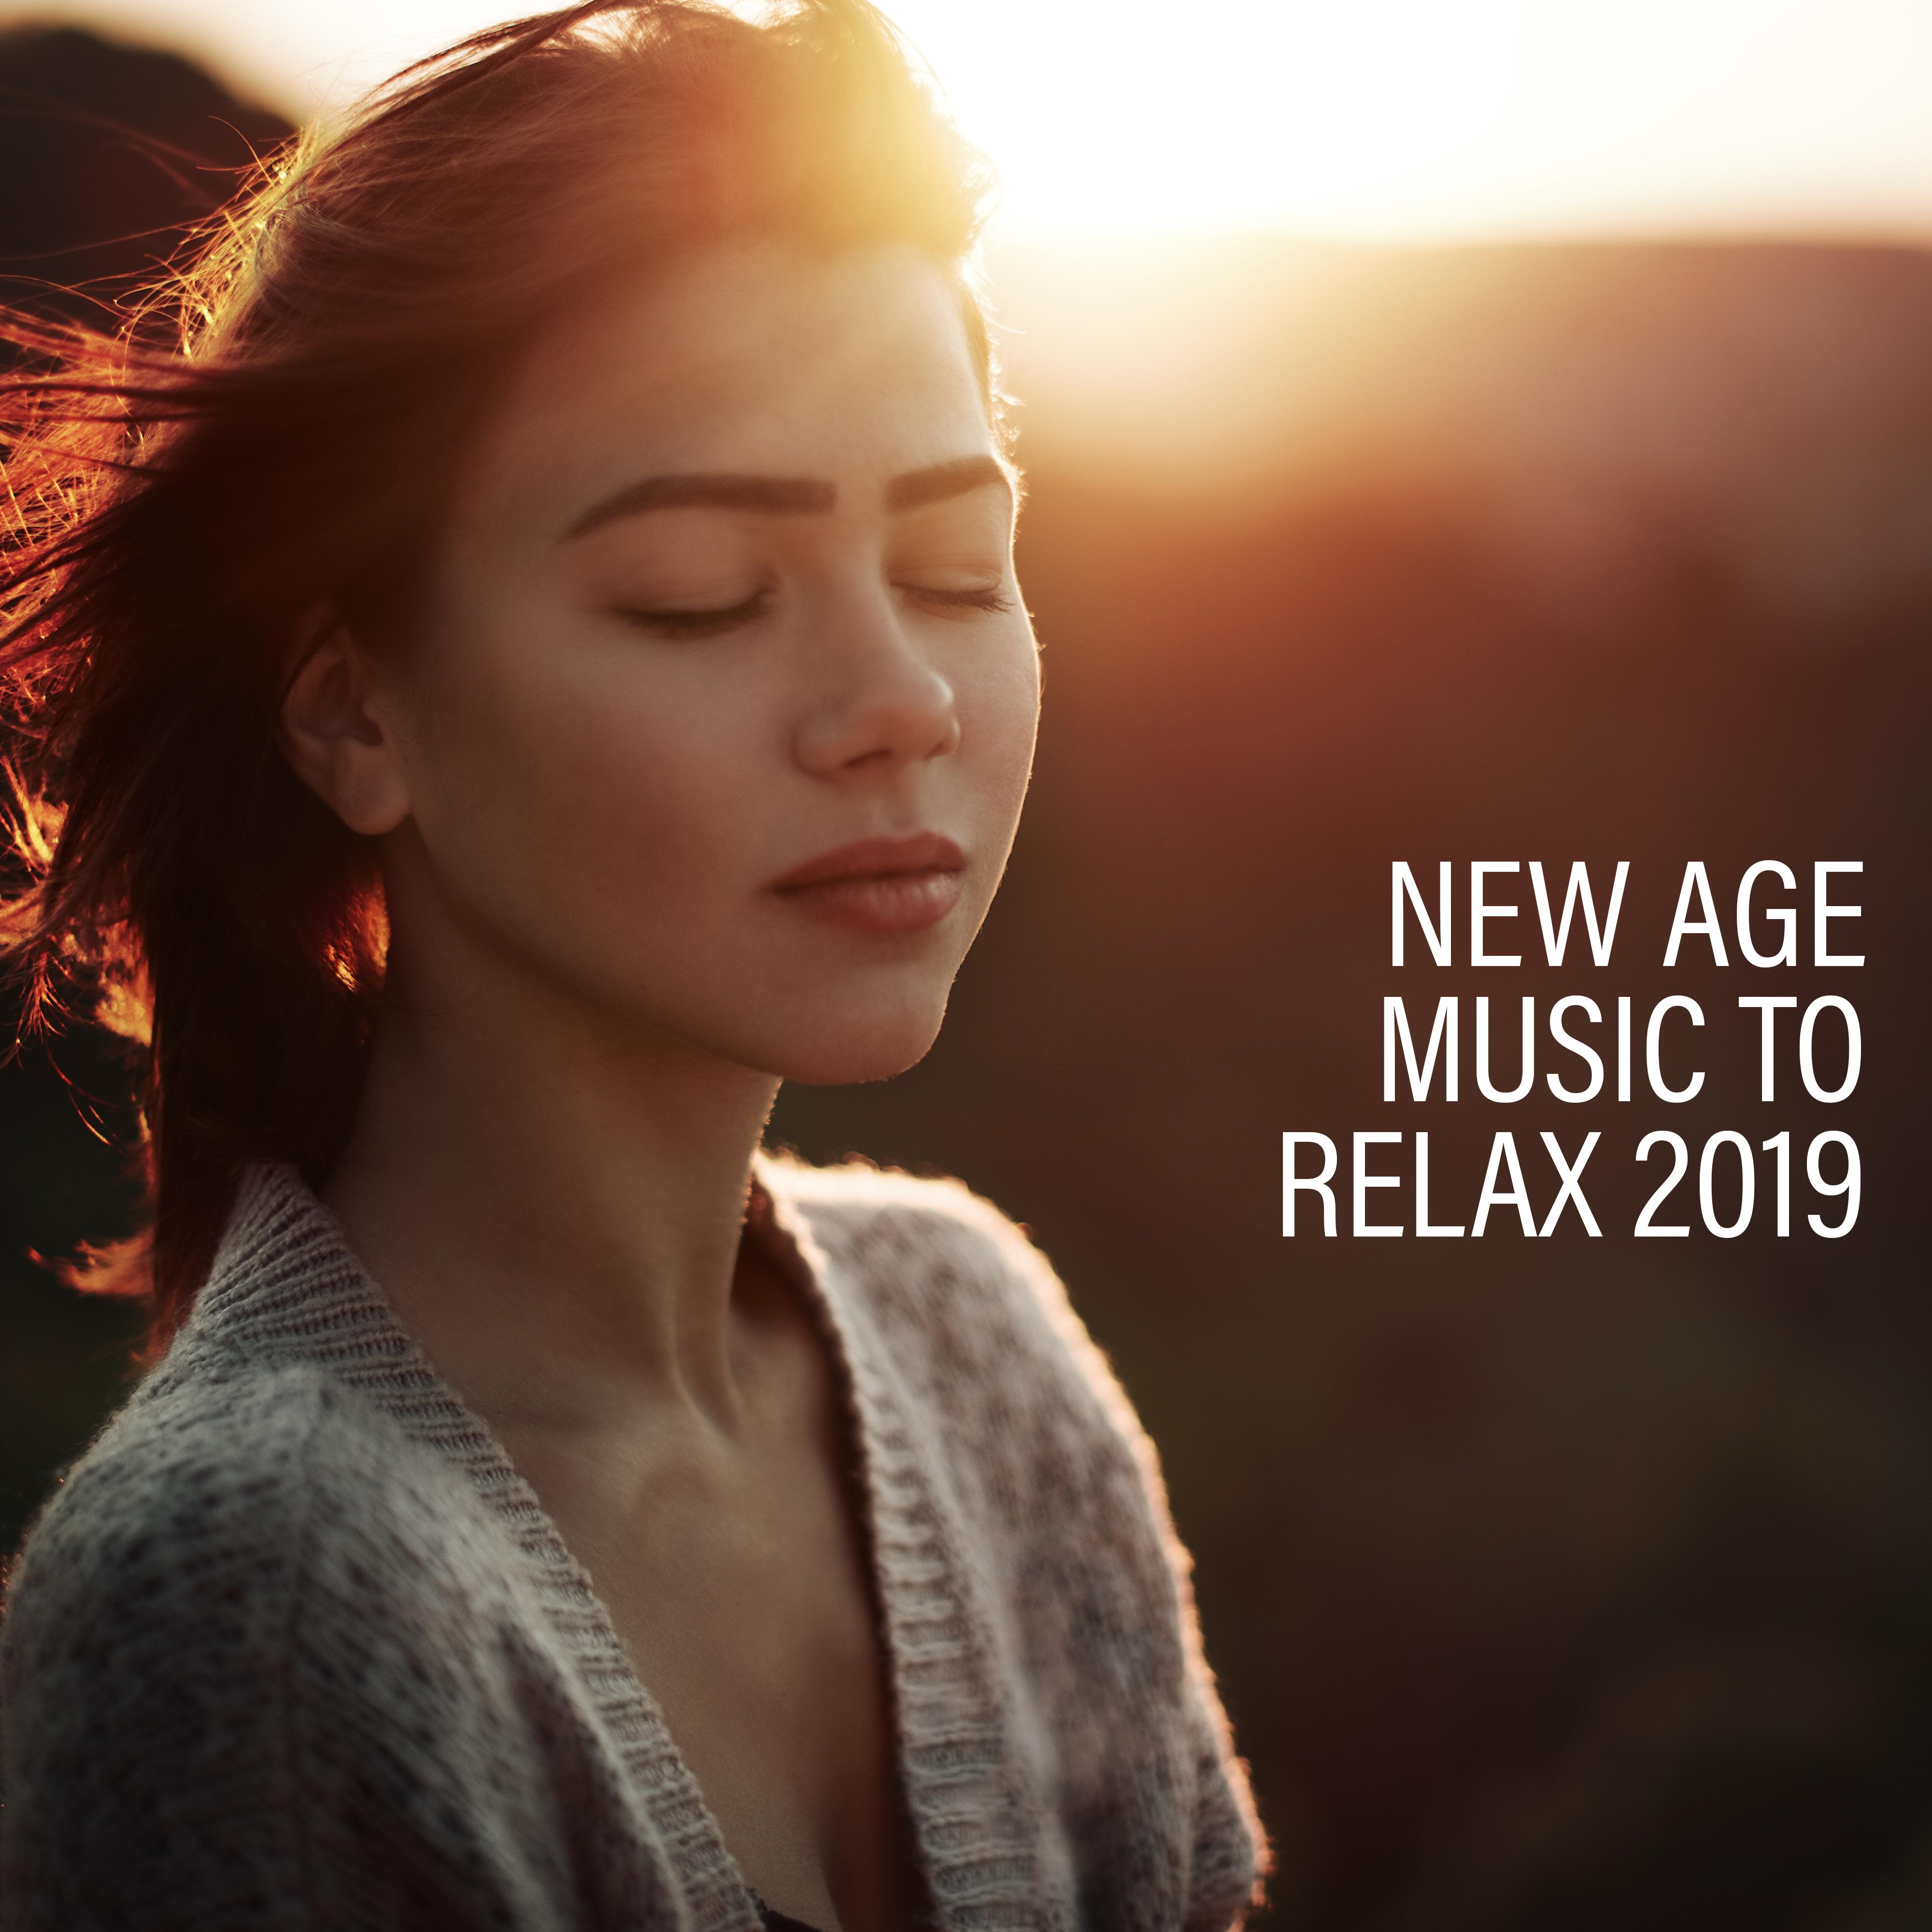 New Age Music to Relax 2019: 15 Ambient Tracks for Total Relaxation, Calming Down, Stress Relief, Good Sleep Sounds